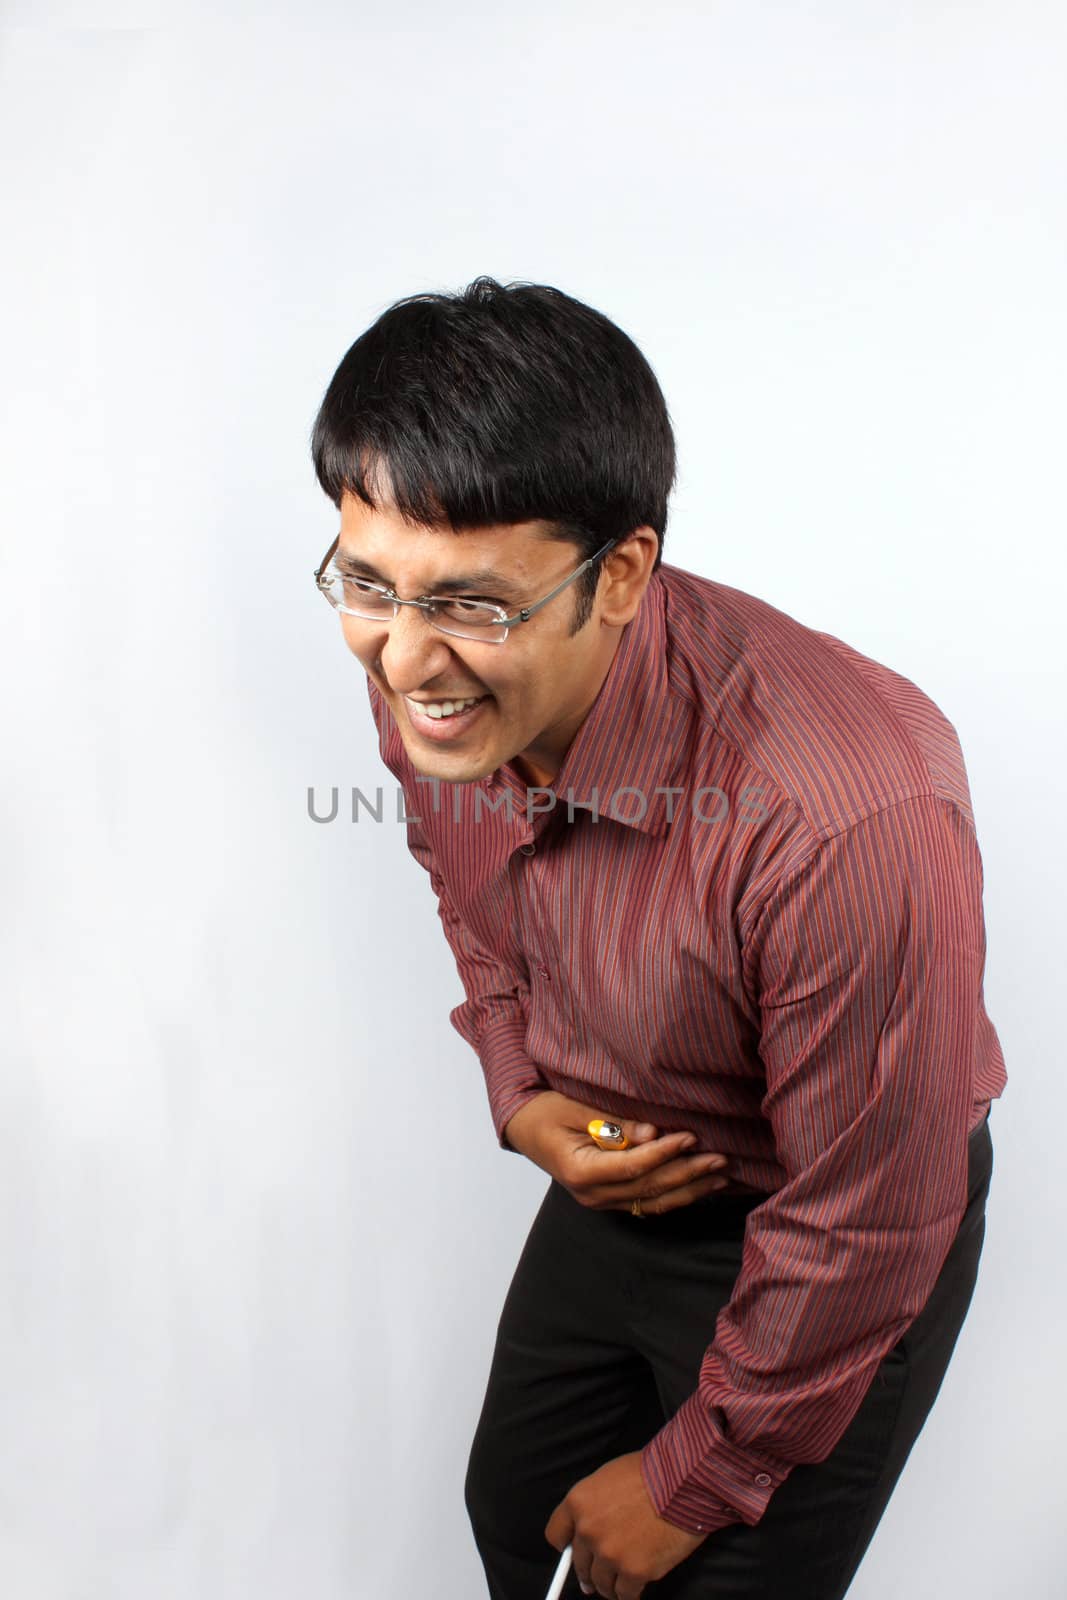 A young Indian man laughing heartily over a joke, holding his belly.